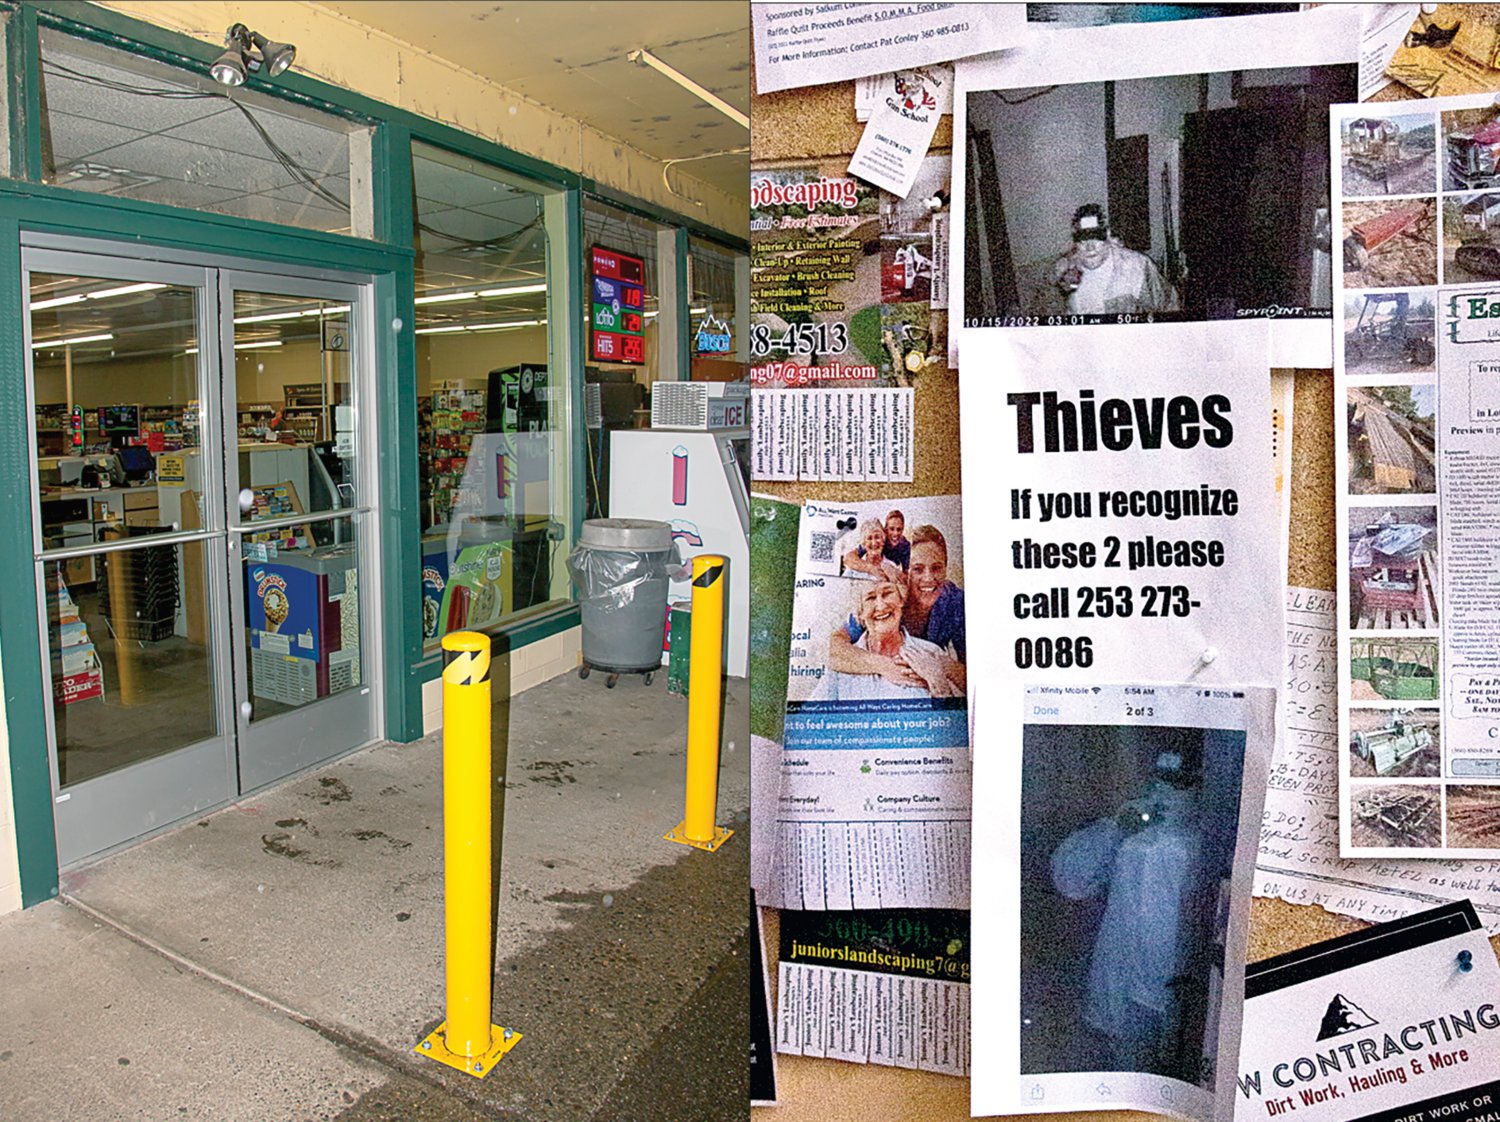 Left: Following multiple break-ins that have now occurred at the Salkum Super Market, two new yellow security posts have been added to protect the new door frame and windows after a car backed through the entrance. Right: Security camera snapshots posted to the Salkum Super Market's bulletin board show the suspects who have yet to be found by authorities.